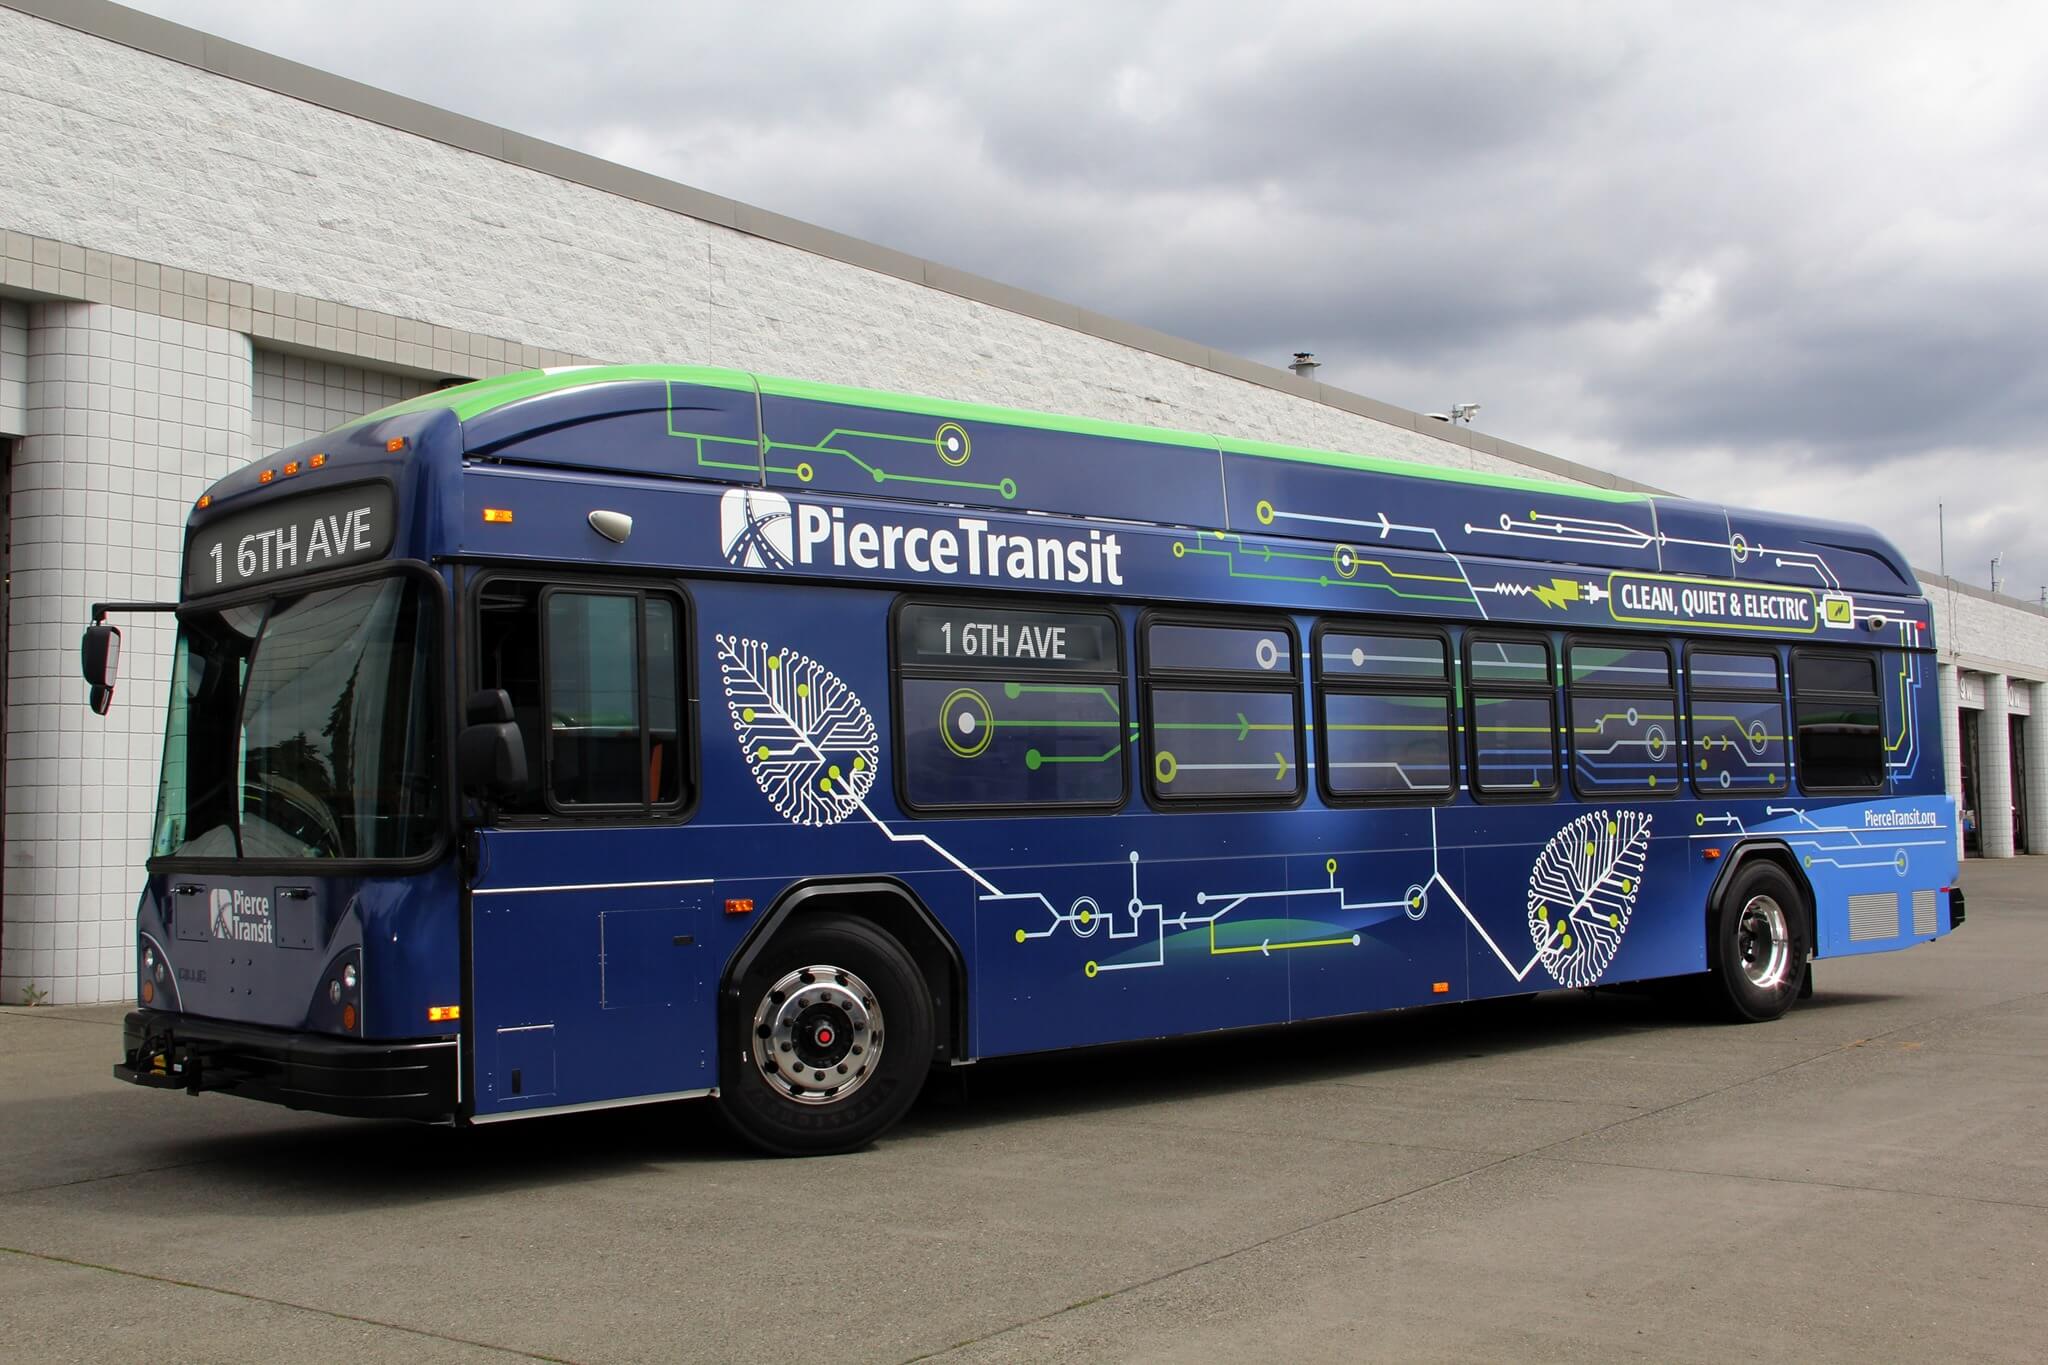 Electric bus graphics for Pierce transit agency by Turbo Images